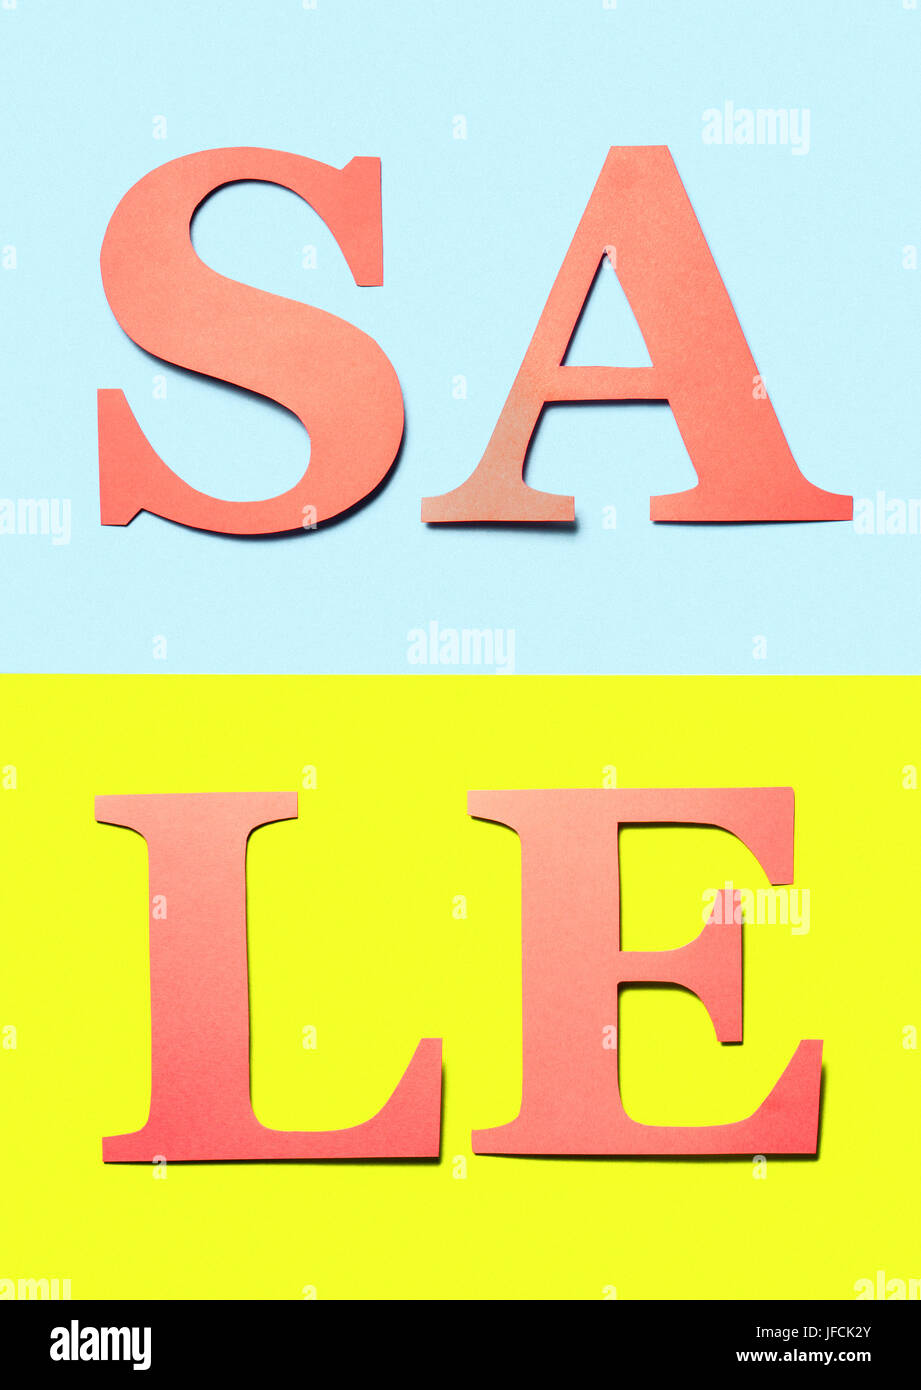 Vertical sale sign. Red orange letters cut from cardboard paper on light blue and yellow background. Colourful craft banner for marketing a special. Stock Photo